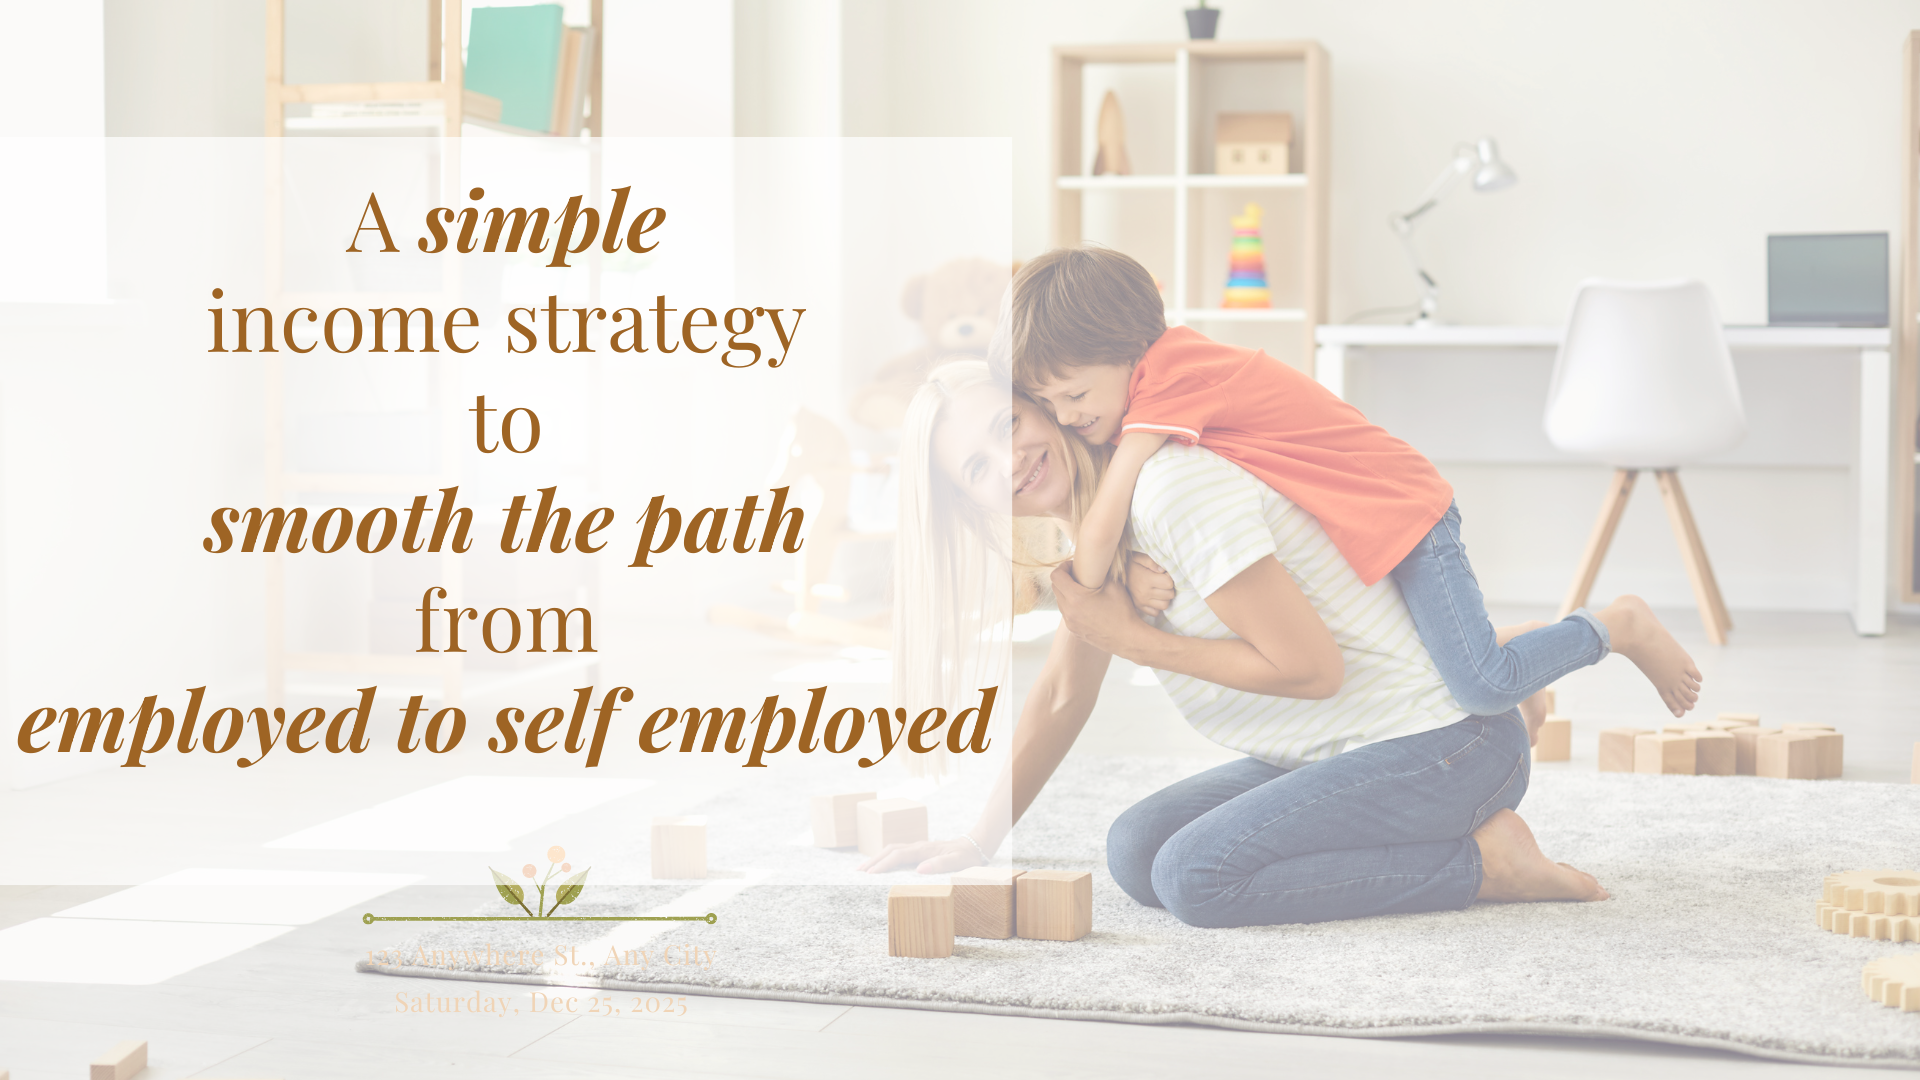 An Income Strategy to Smooth the Transition from Employed to Self Employed